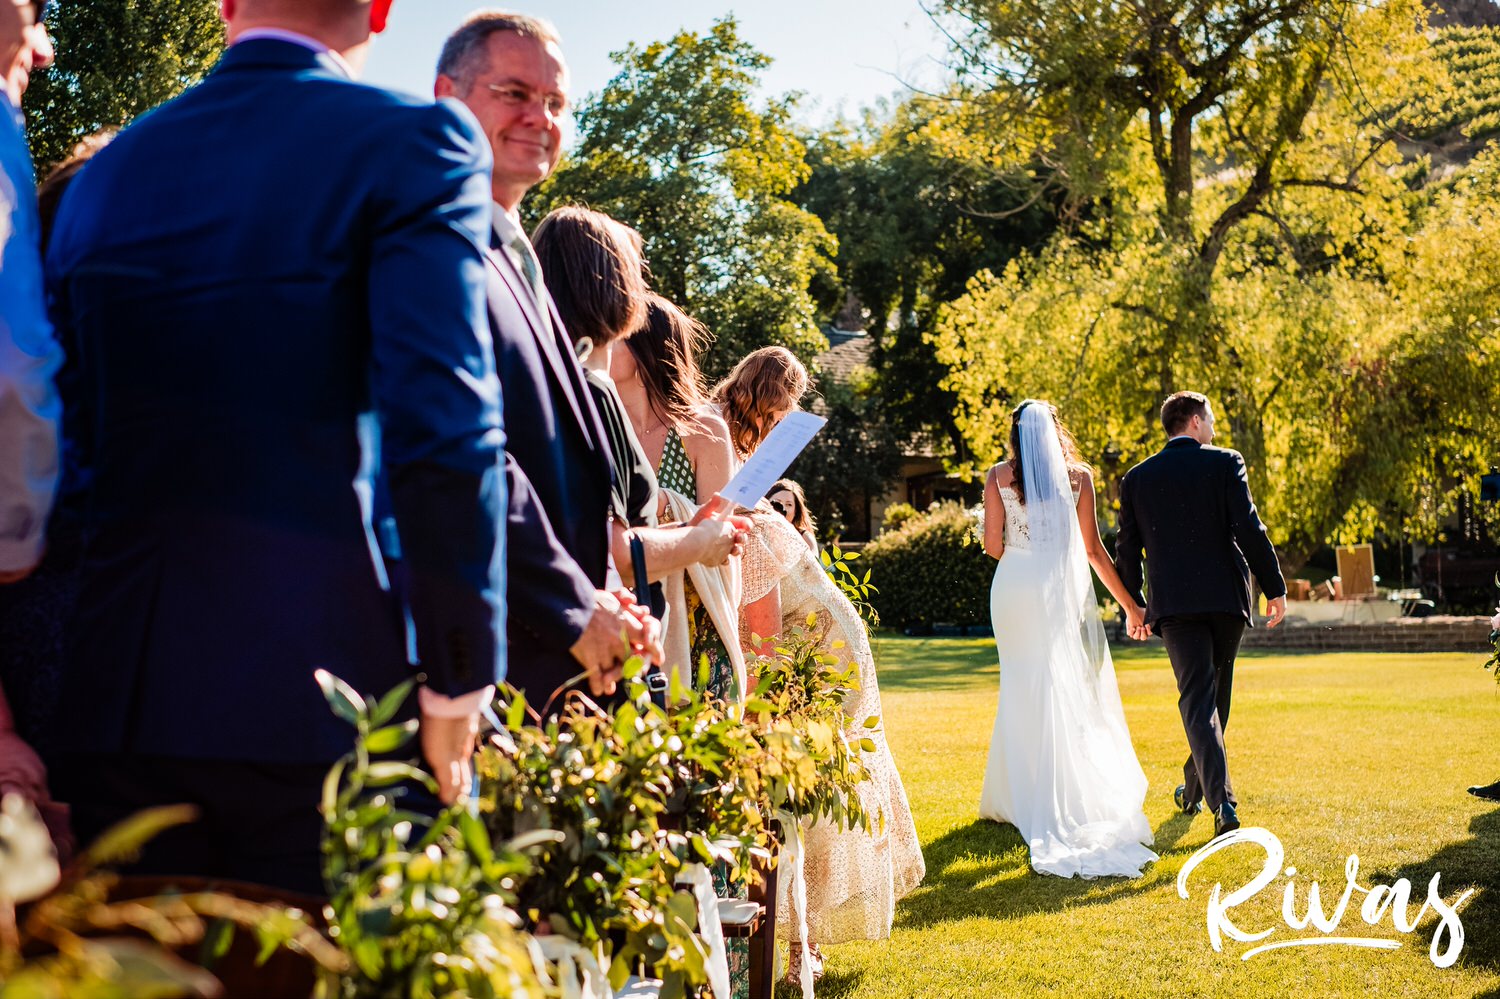 Saddlerock Ranch Summer Wedding | Destination Wedding Photographers | Rivas | A candid photo of the bride and groom walking back down the aisle holding hands, taken from their viewpoint. 